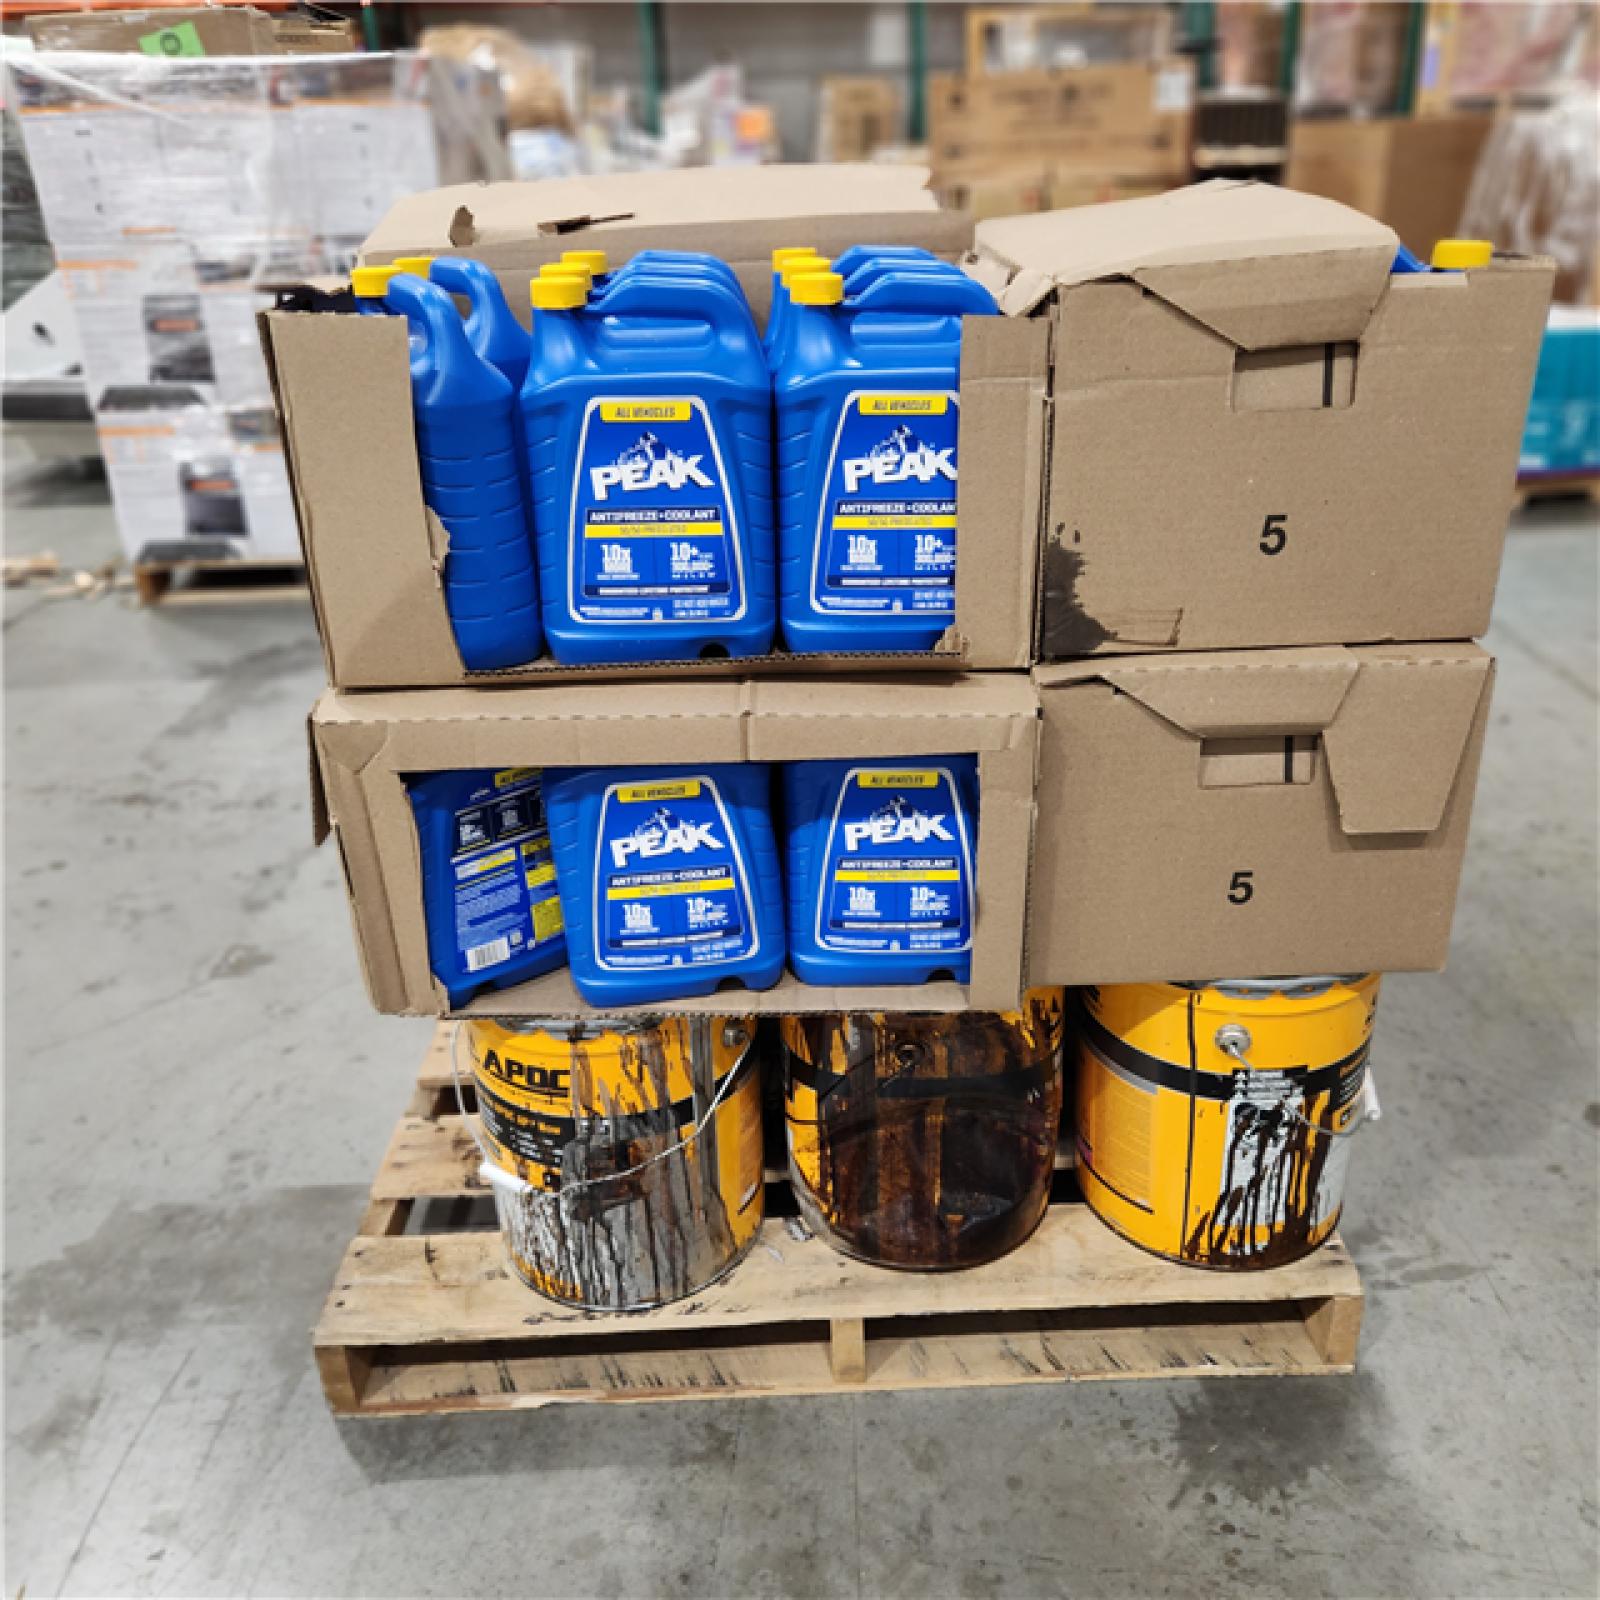 DALLAS LOCATION - PALLET OF MIXED CLEANING PRODUCT, ETC